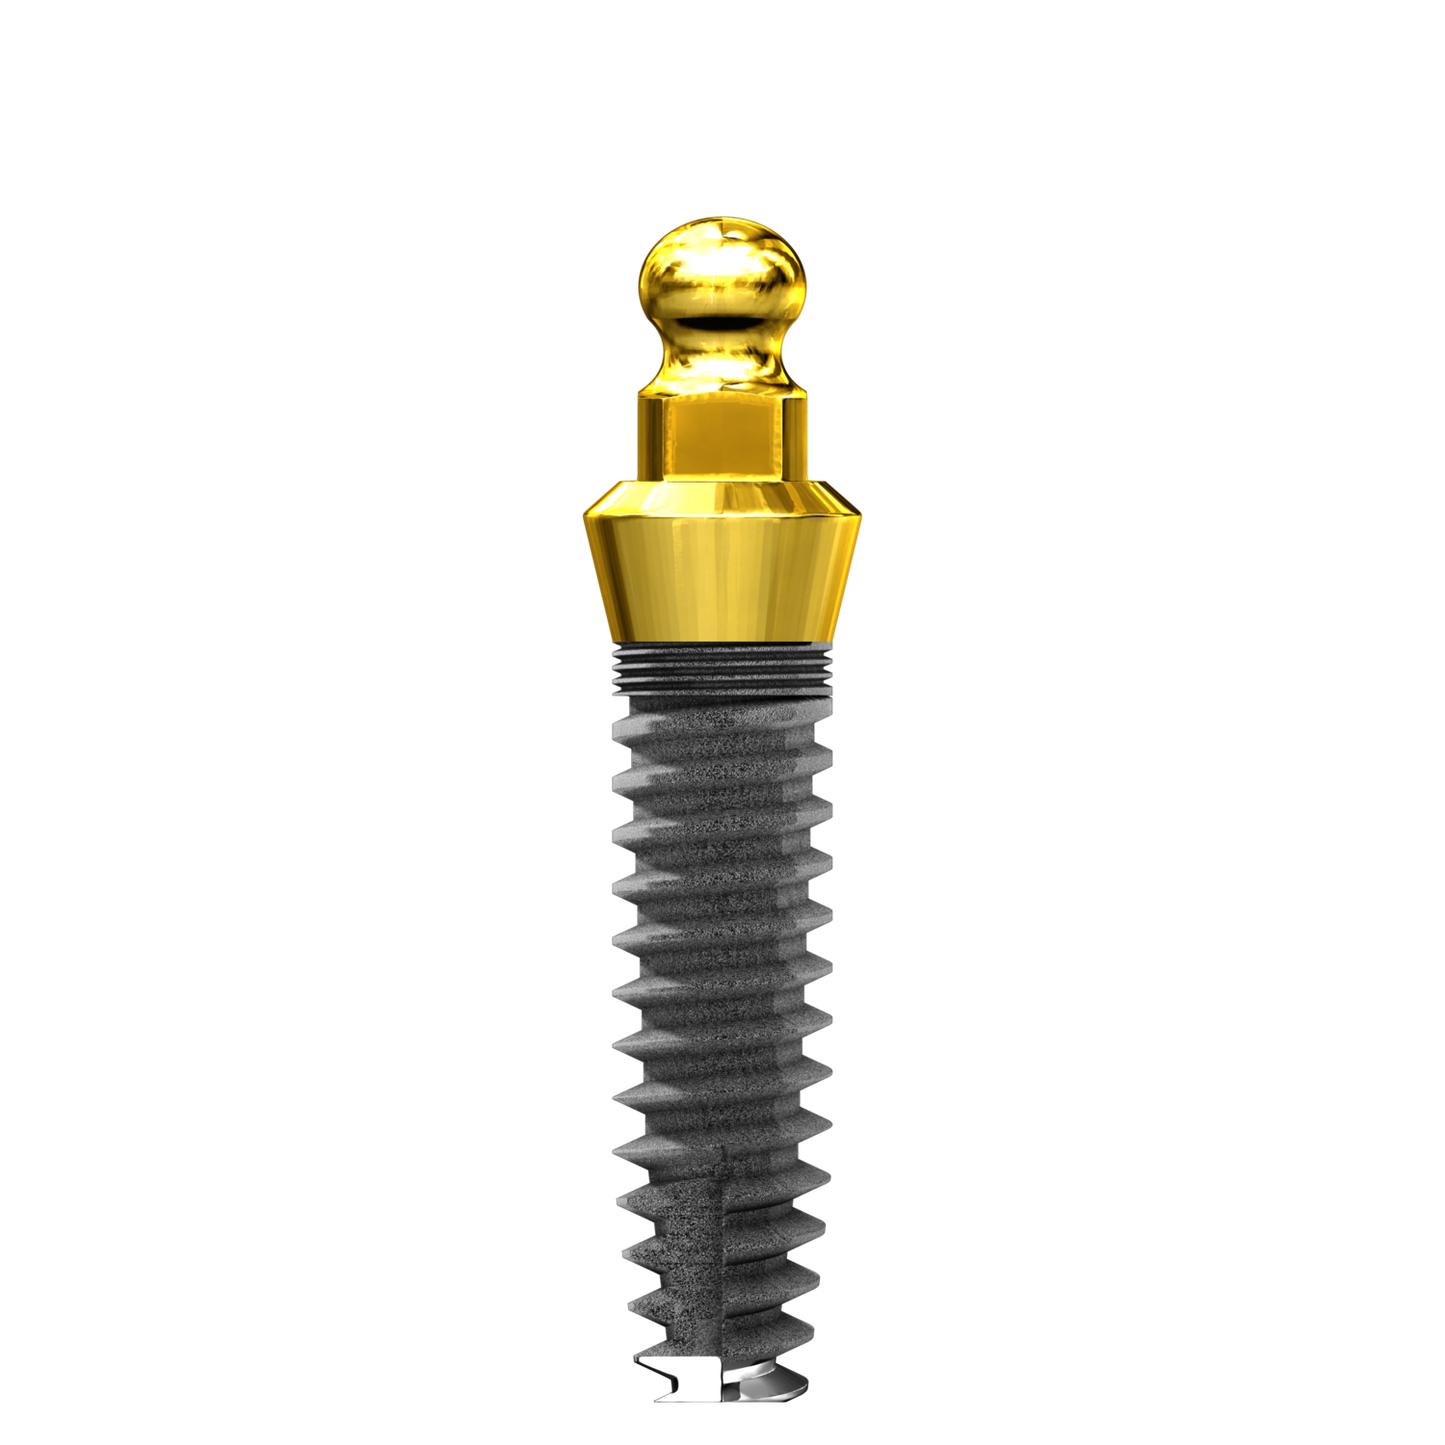 5.0mm x 16mm ISI O-Ball One Piece Implant